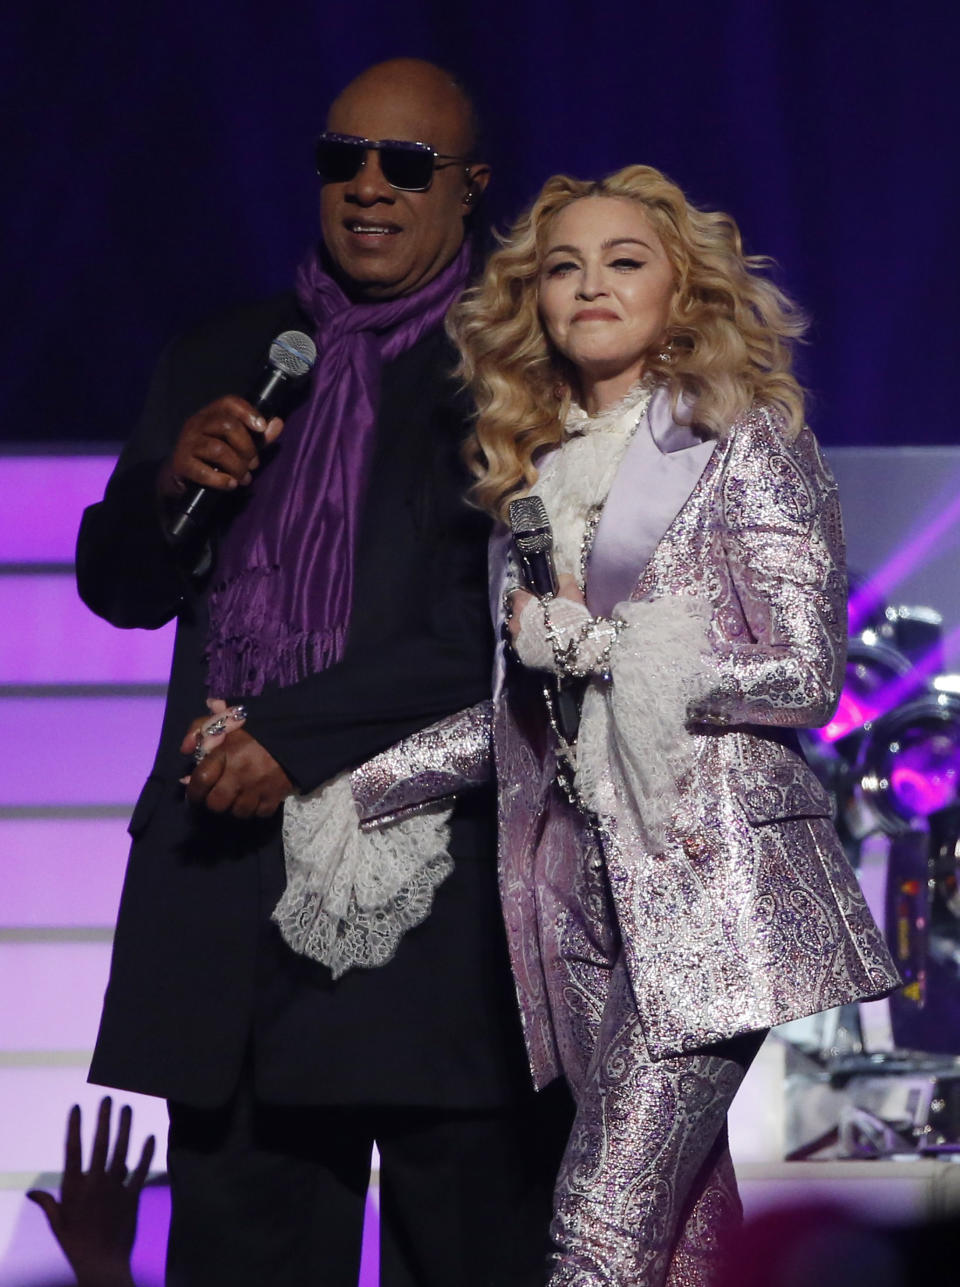 Stevie Wonder and Madonna perform "Purple Rain" during the tribute to Prince at the 2016 Billboard Awards in Las Vegas, Nevada, U.S., May 22, 2016.  REUTERS/Mario Anzuoni